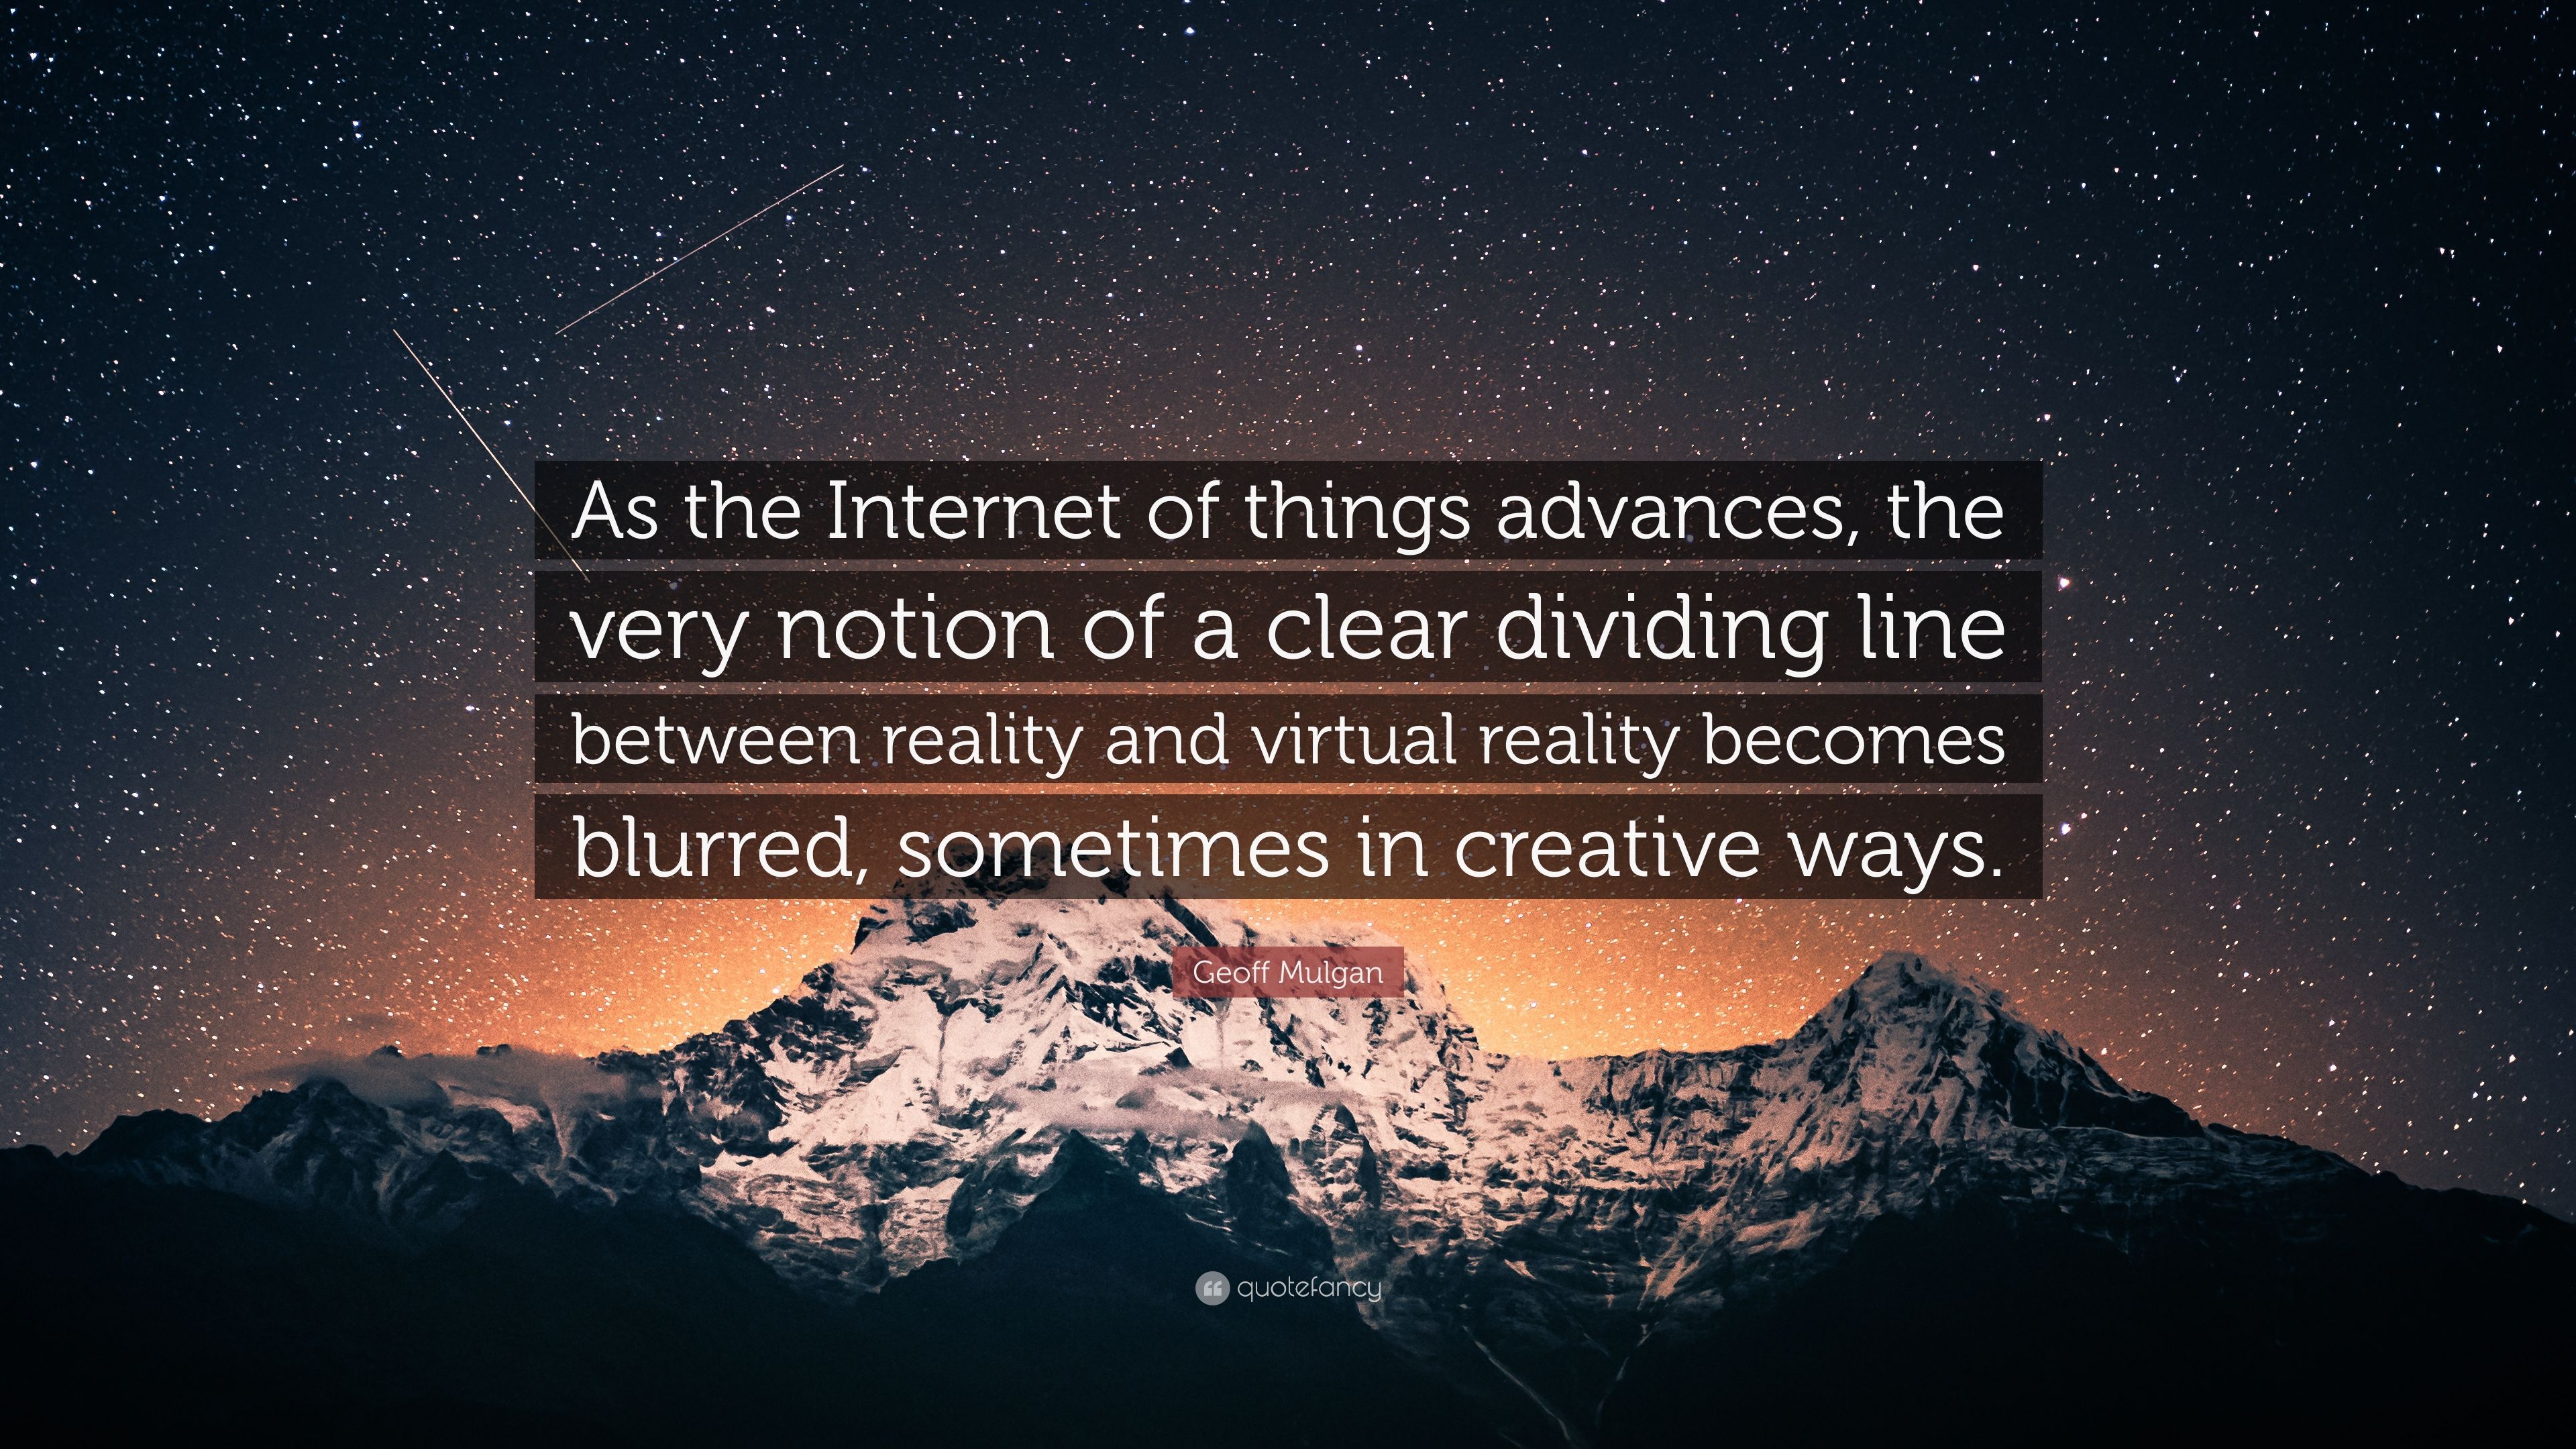 Geoff Mulgan Quote: “As the Internet of things advances, the very